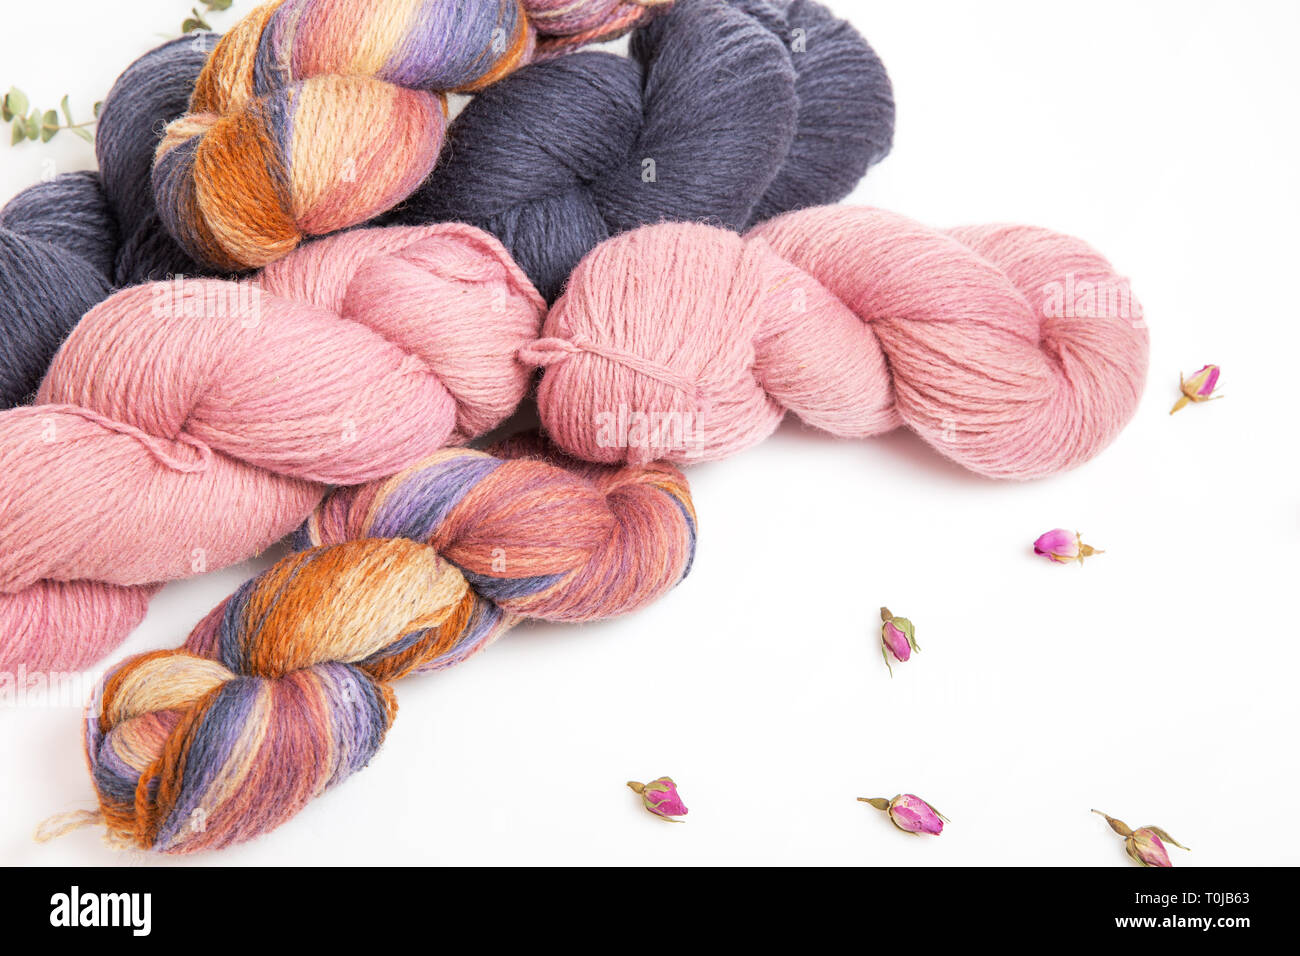 Pink, gray, multicolored yarn of wool in bundles for hand knitting